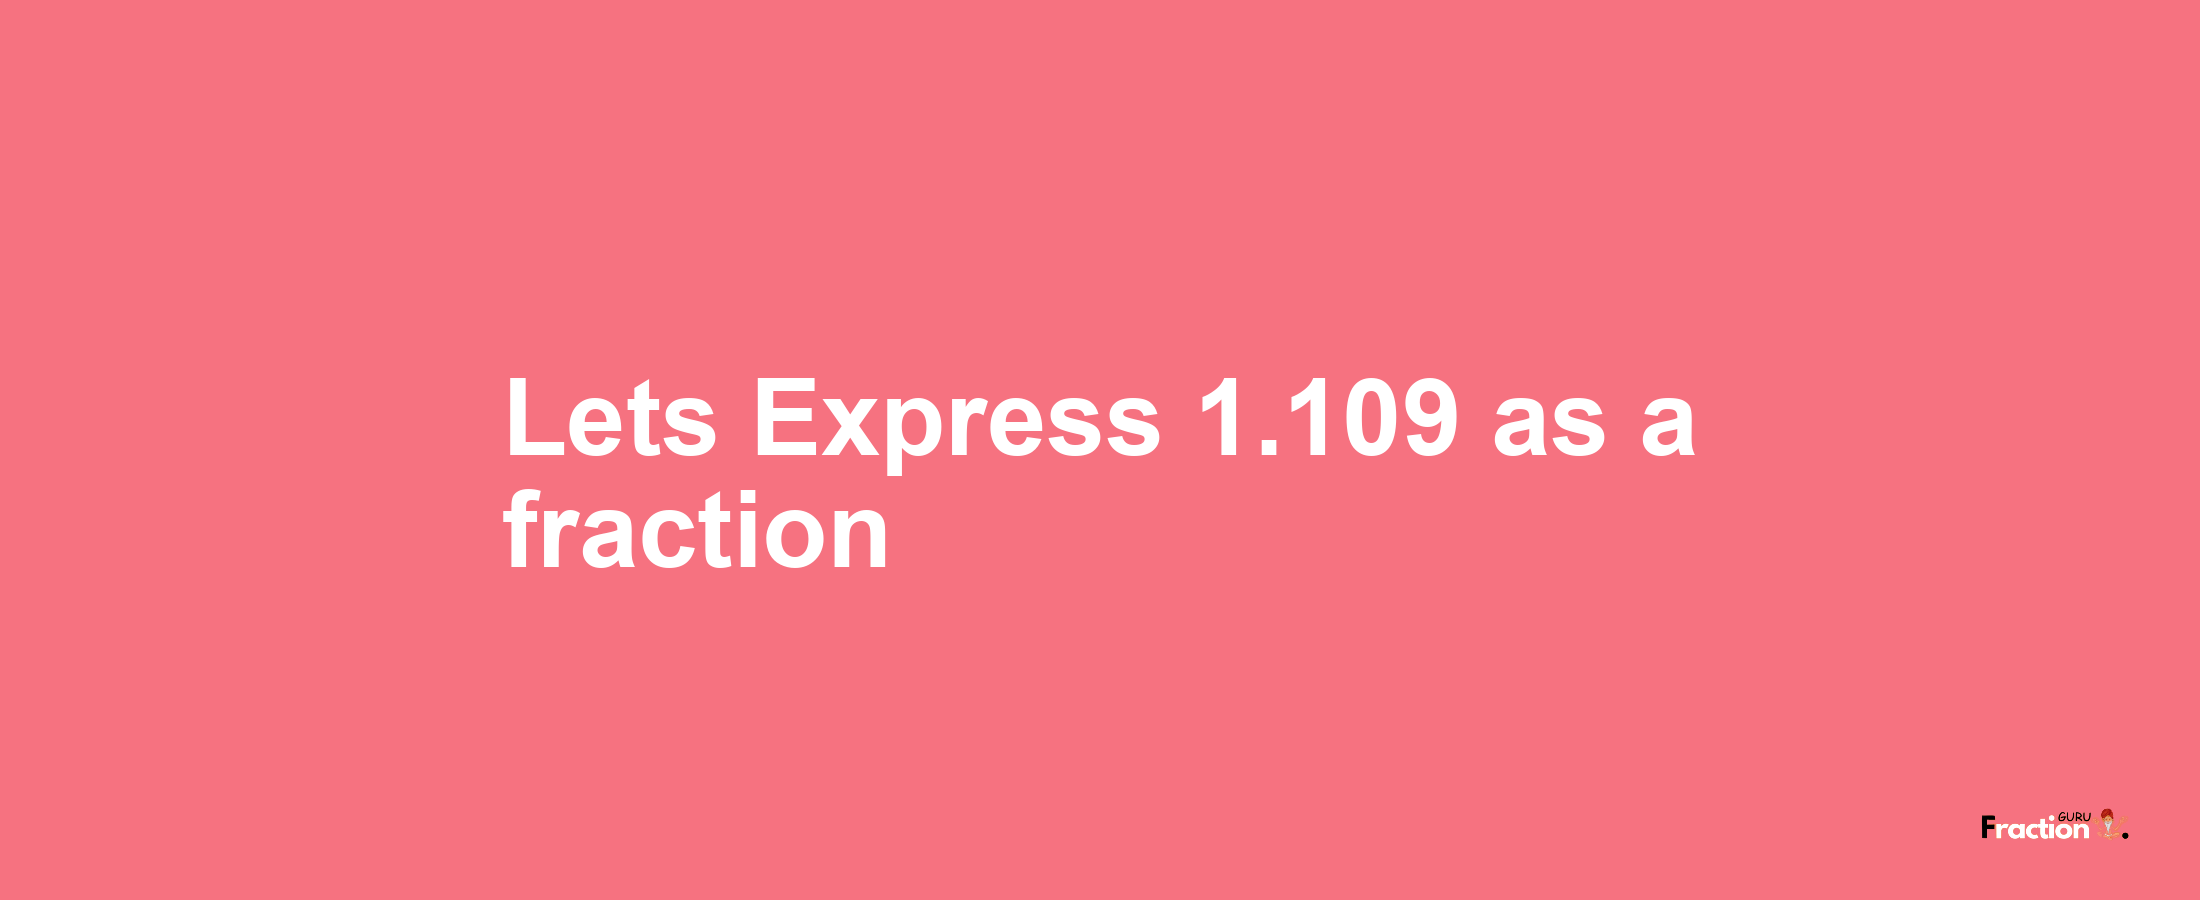 Lets Express 1.109 as afraction